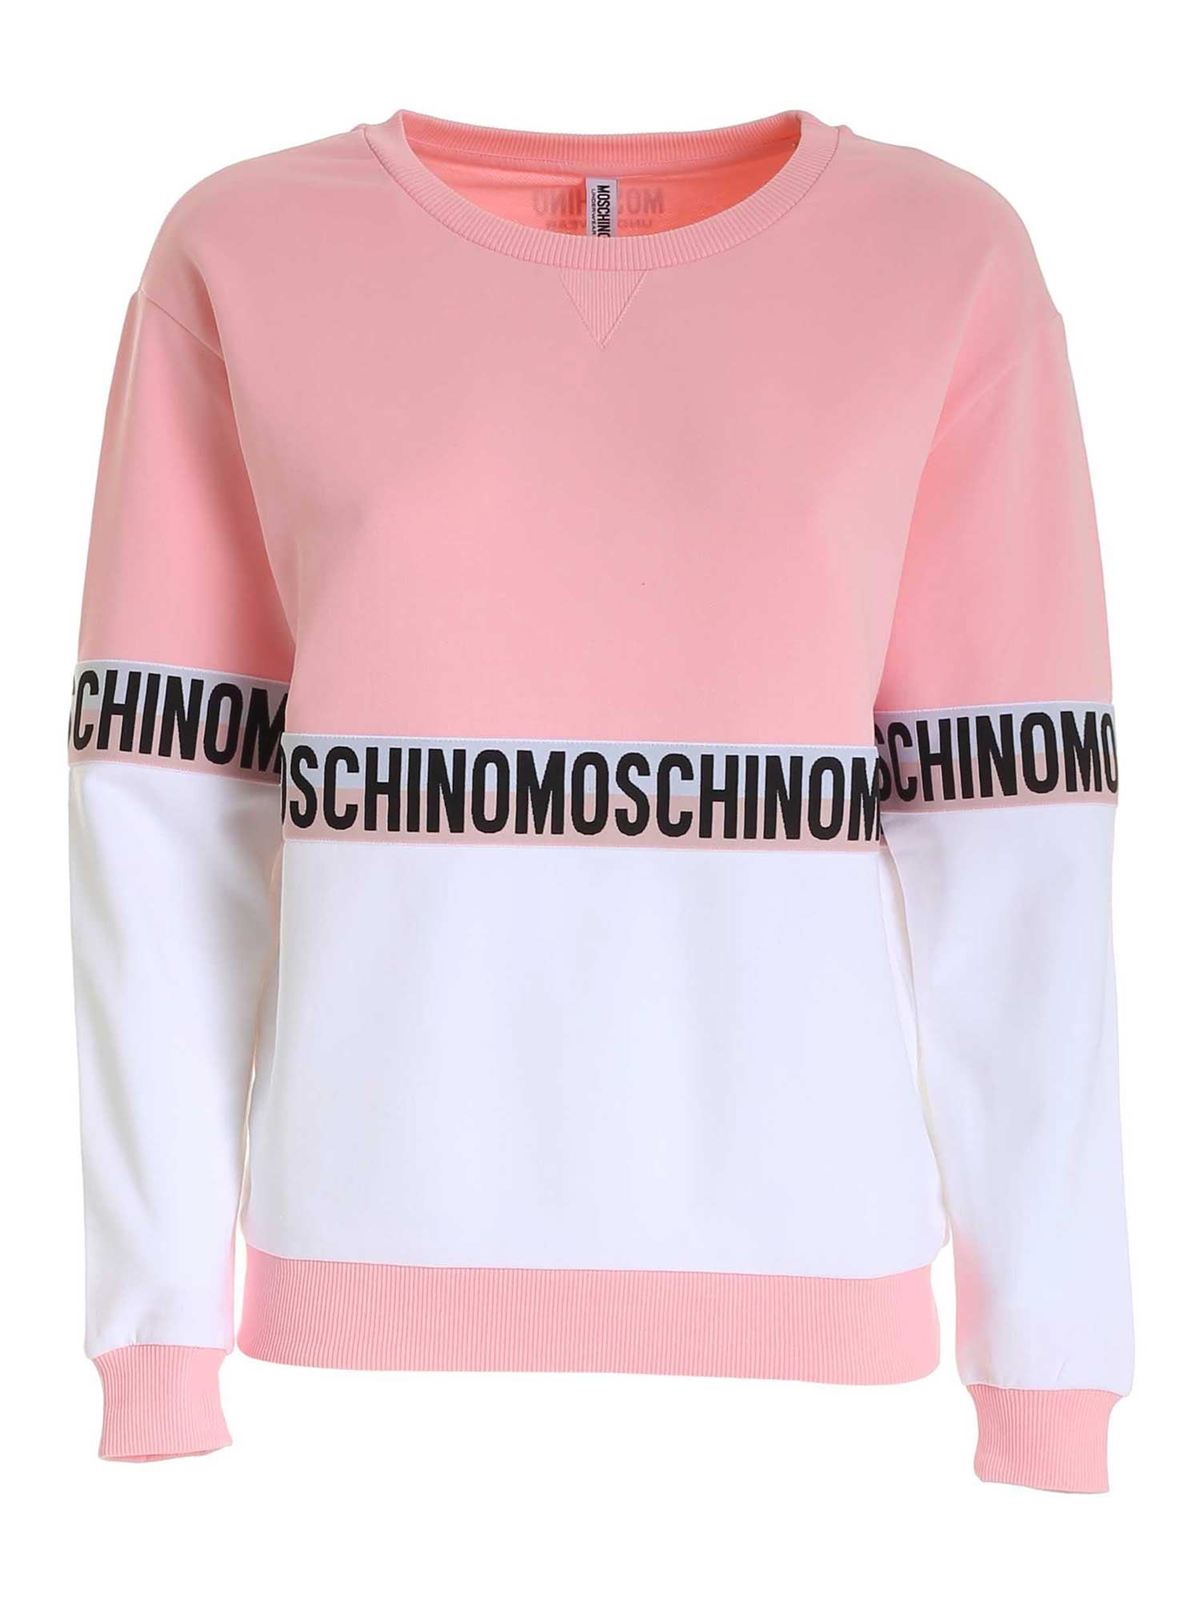 MOSCHINO LOGOED BANDS SWEATSHIRT IN PINK AND WHITE